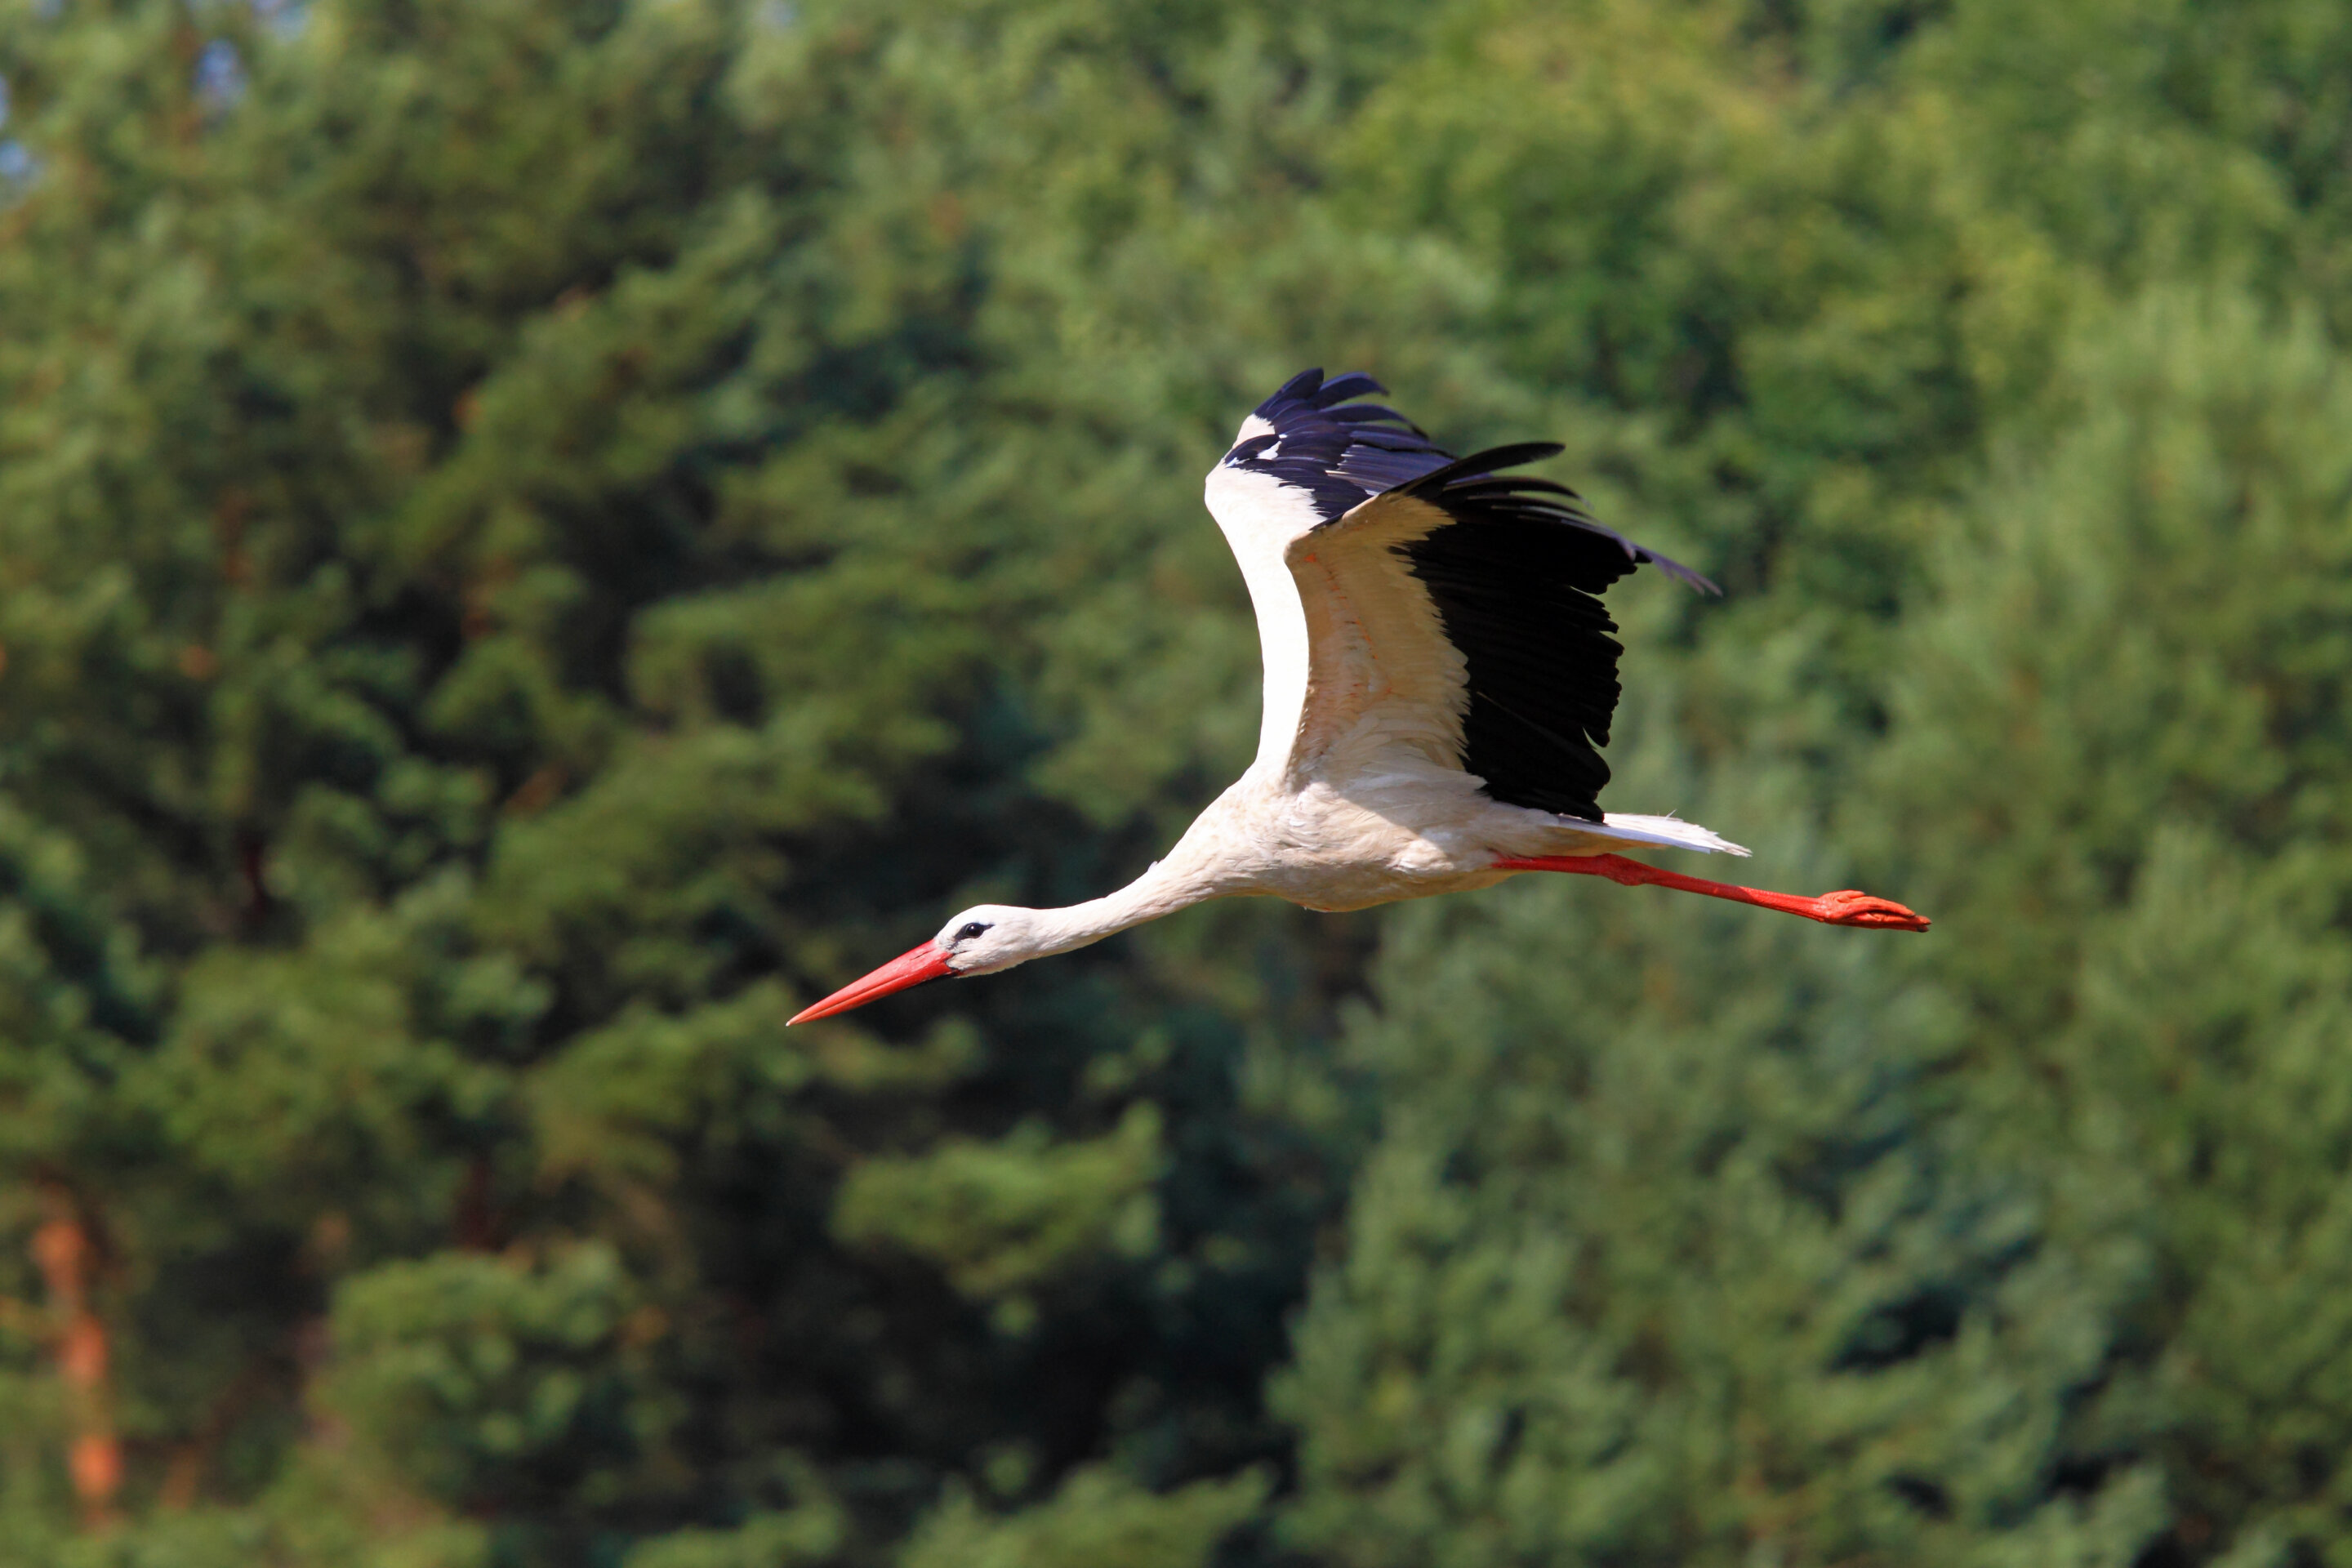 Birds of a feather flocking together: Research shows storks prefer to fly with conspecifics during migration